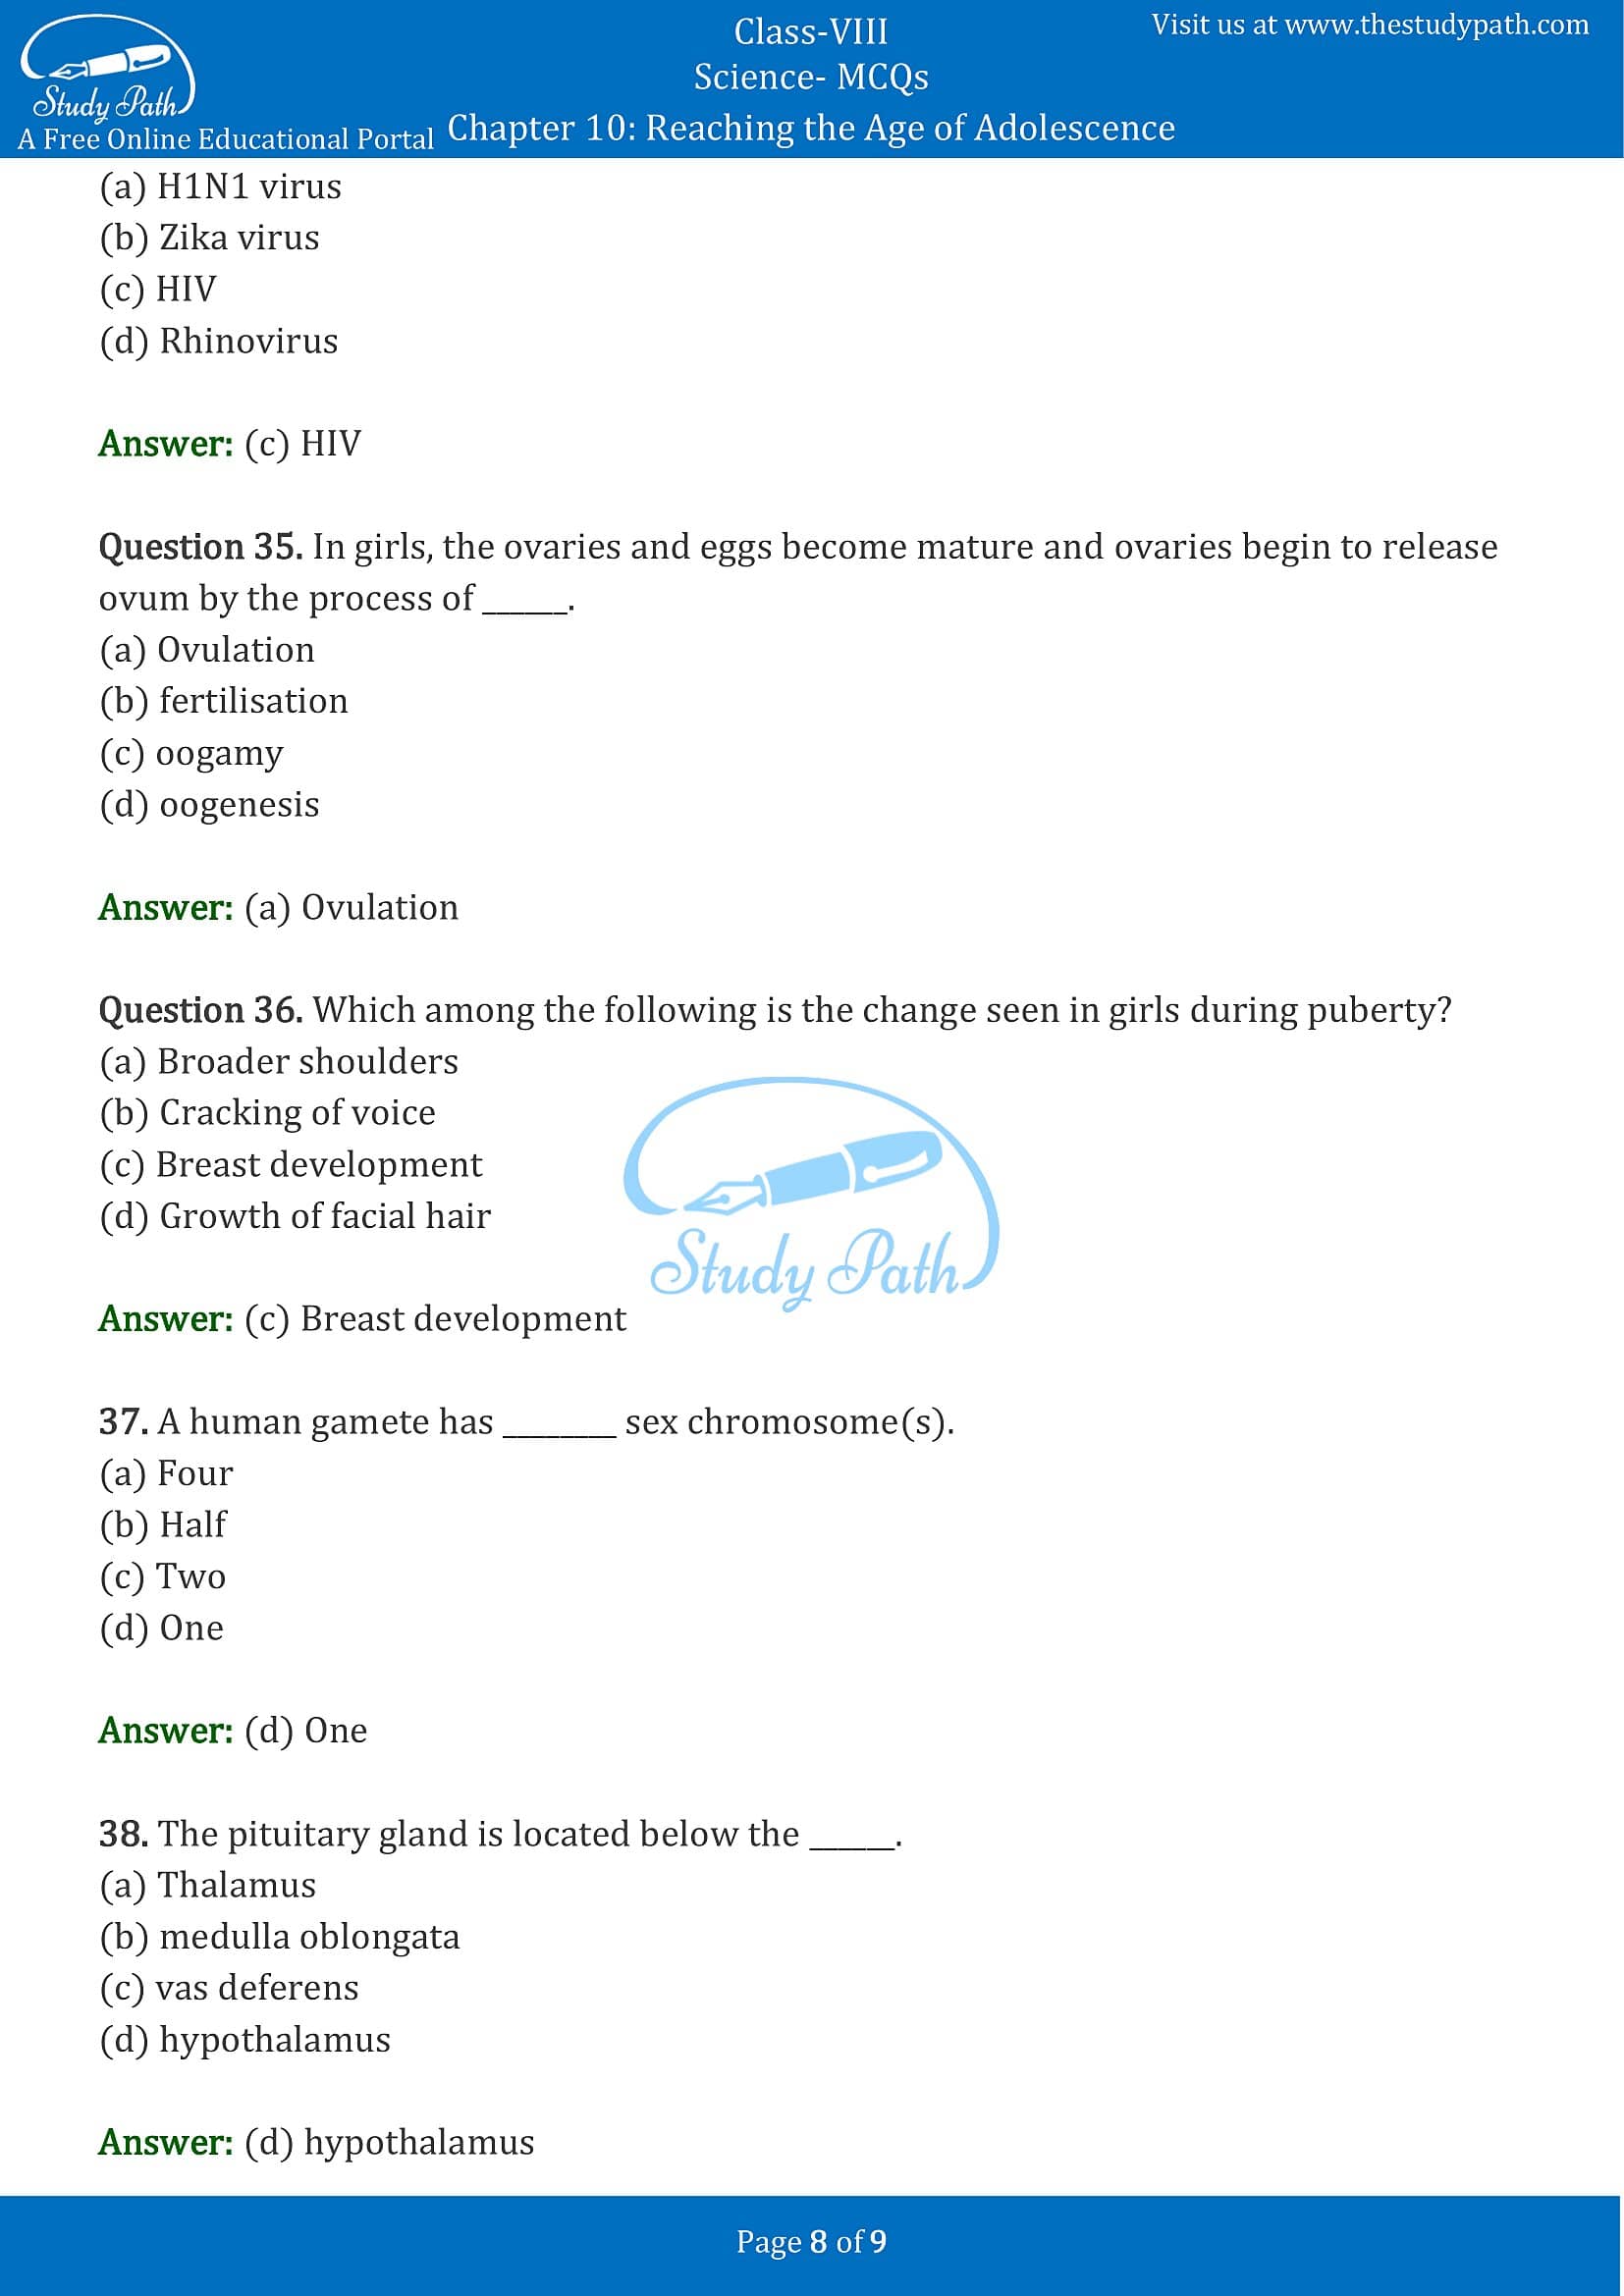 MCQ Questions for Class 8 Science Chapter 10 Reaching the Age of Adolescence with Answers PDF -8